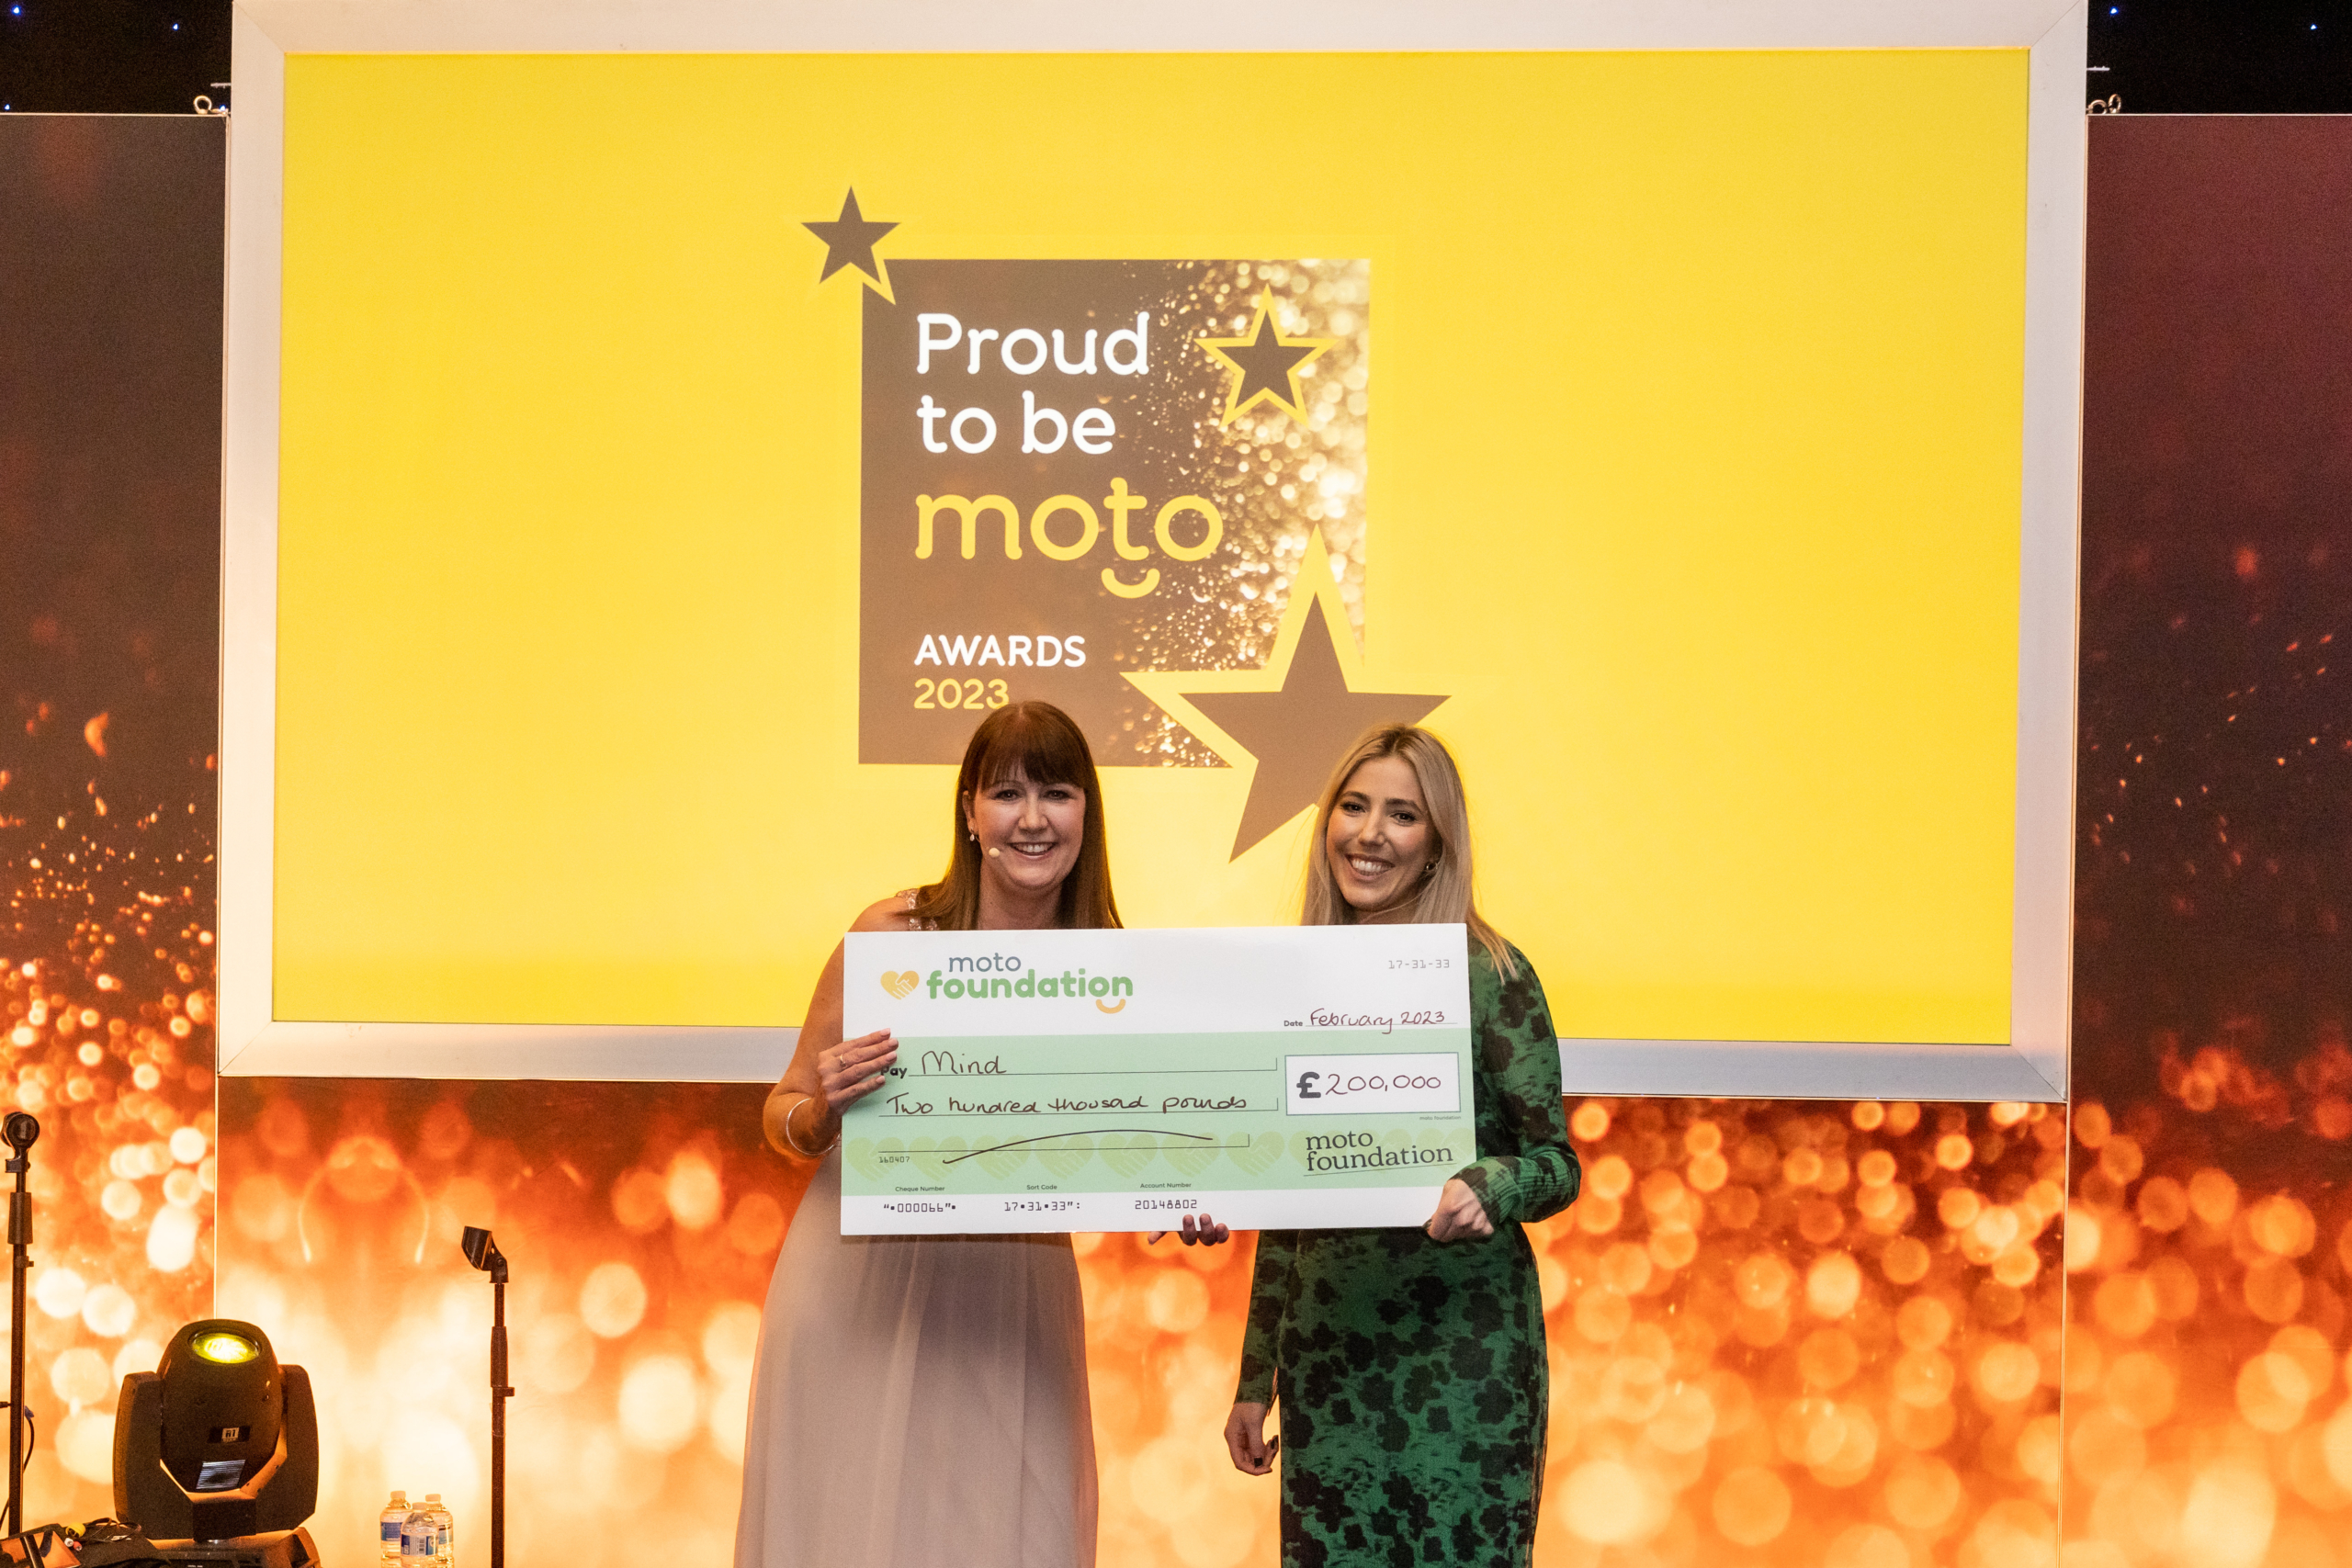 Moto Foundation’s first donation to Mind: £200,000!